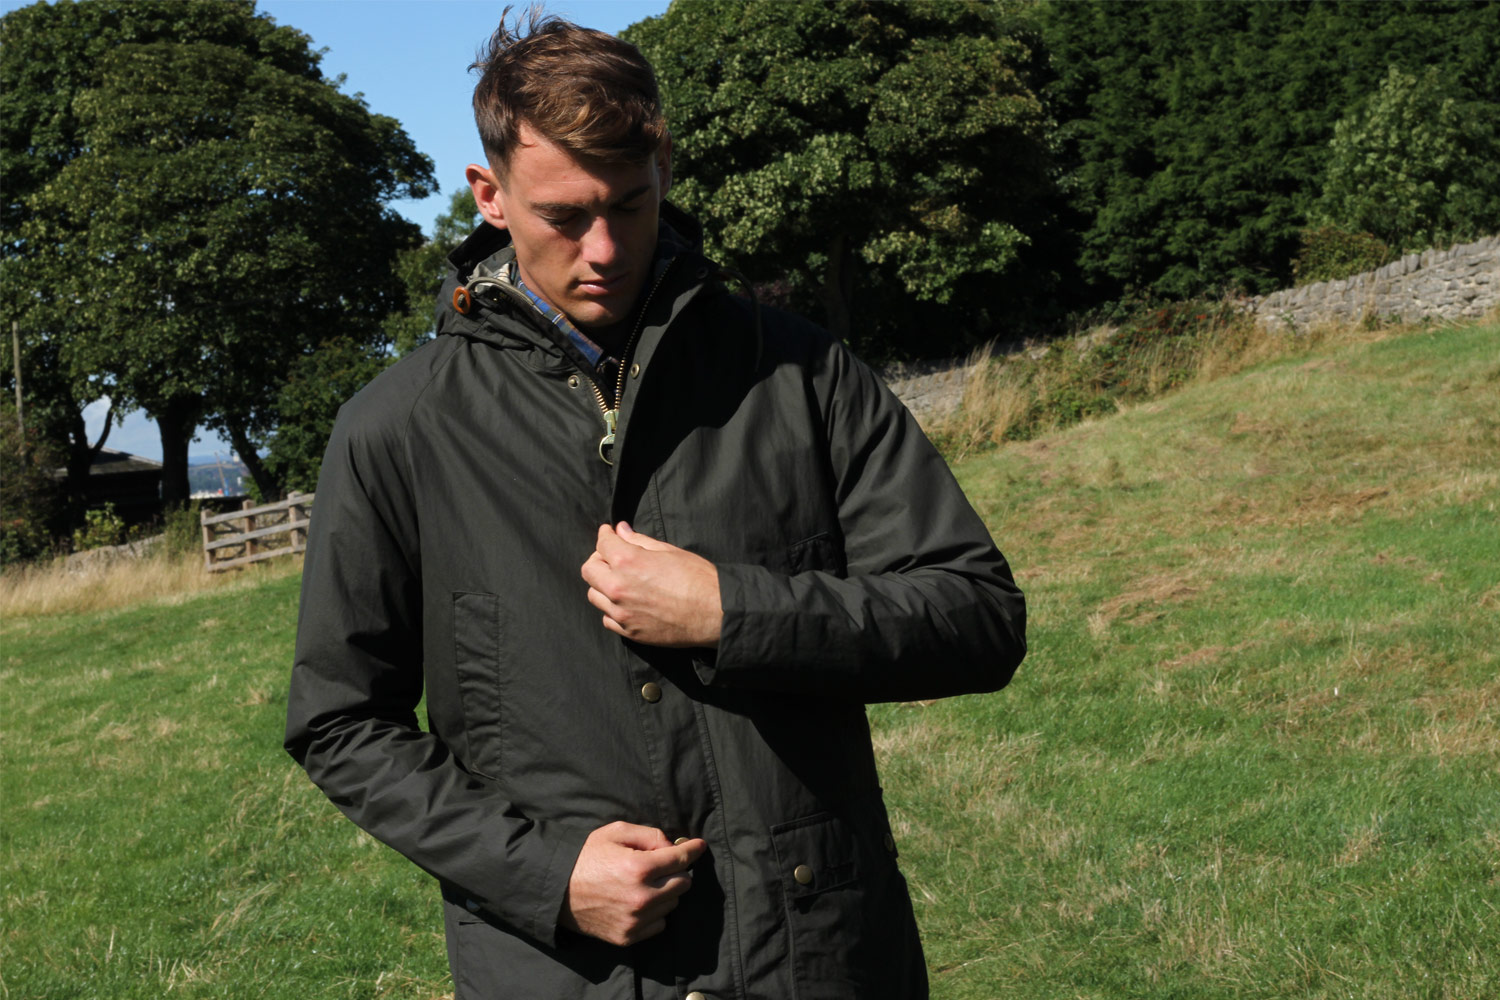 Barbour Hooded Bedale Jacket